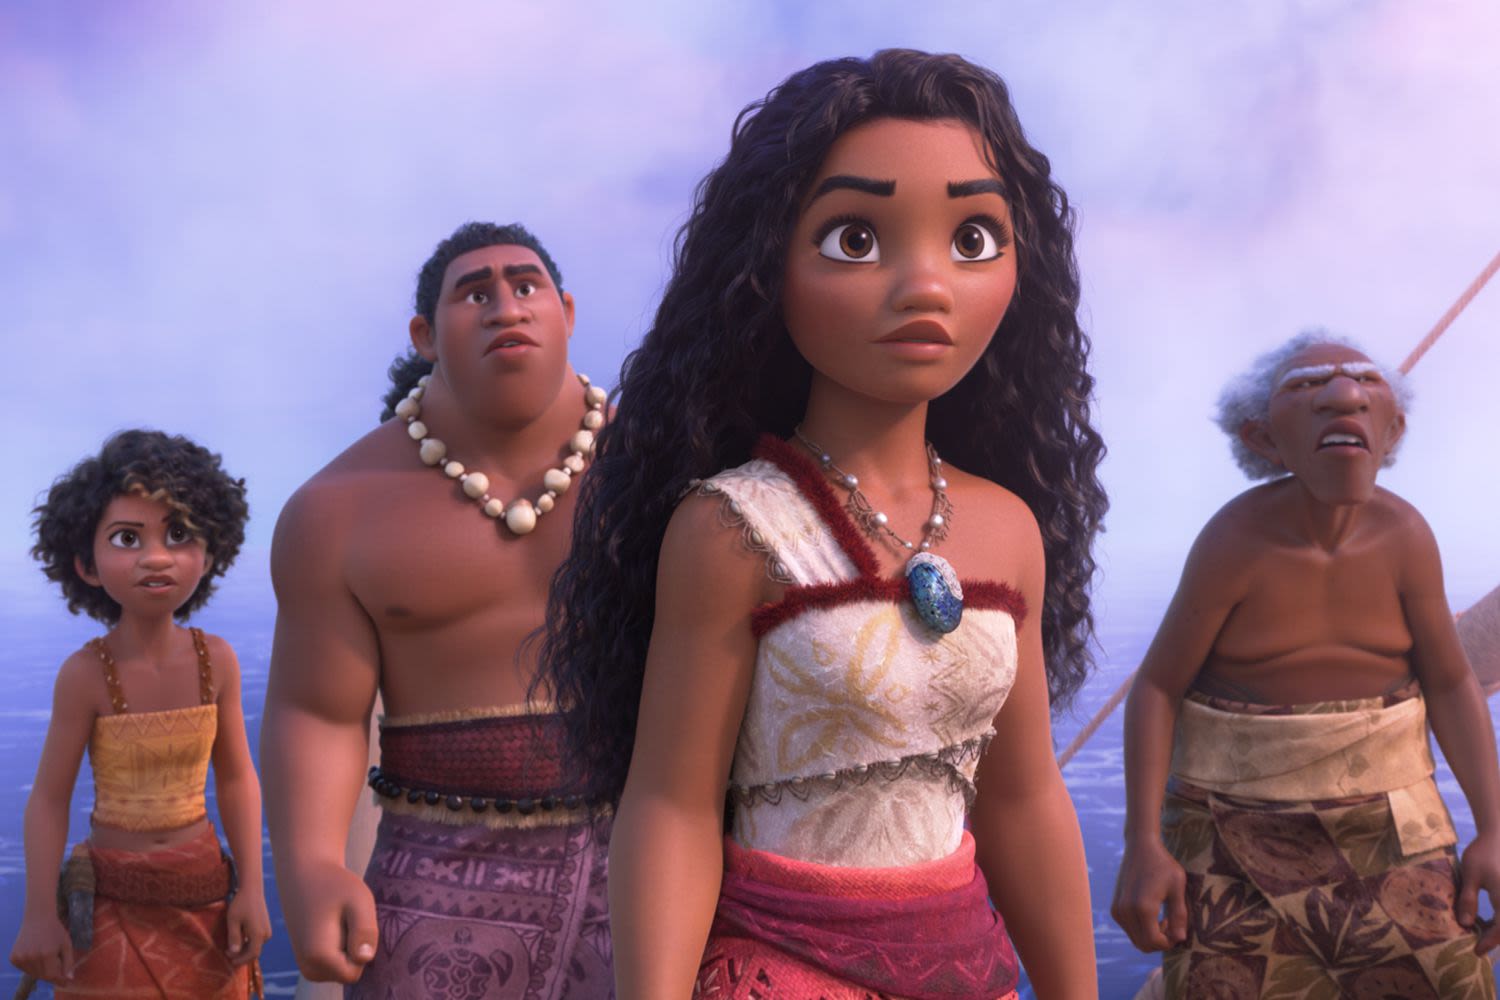 'Moana 2' Trailer Breaks a Disney Record for Most Views, Topping 'Inside Out 2' and 'Frozen 2'